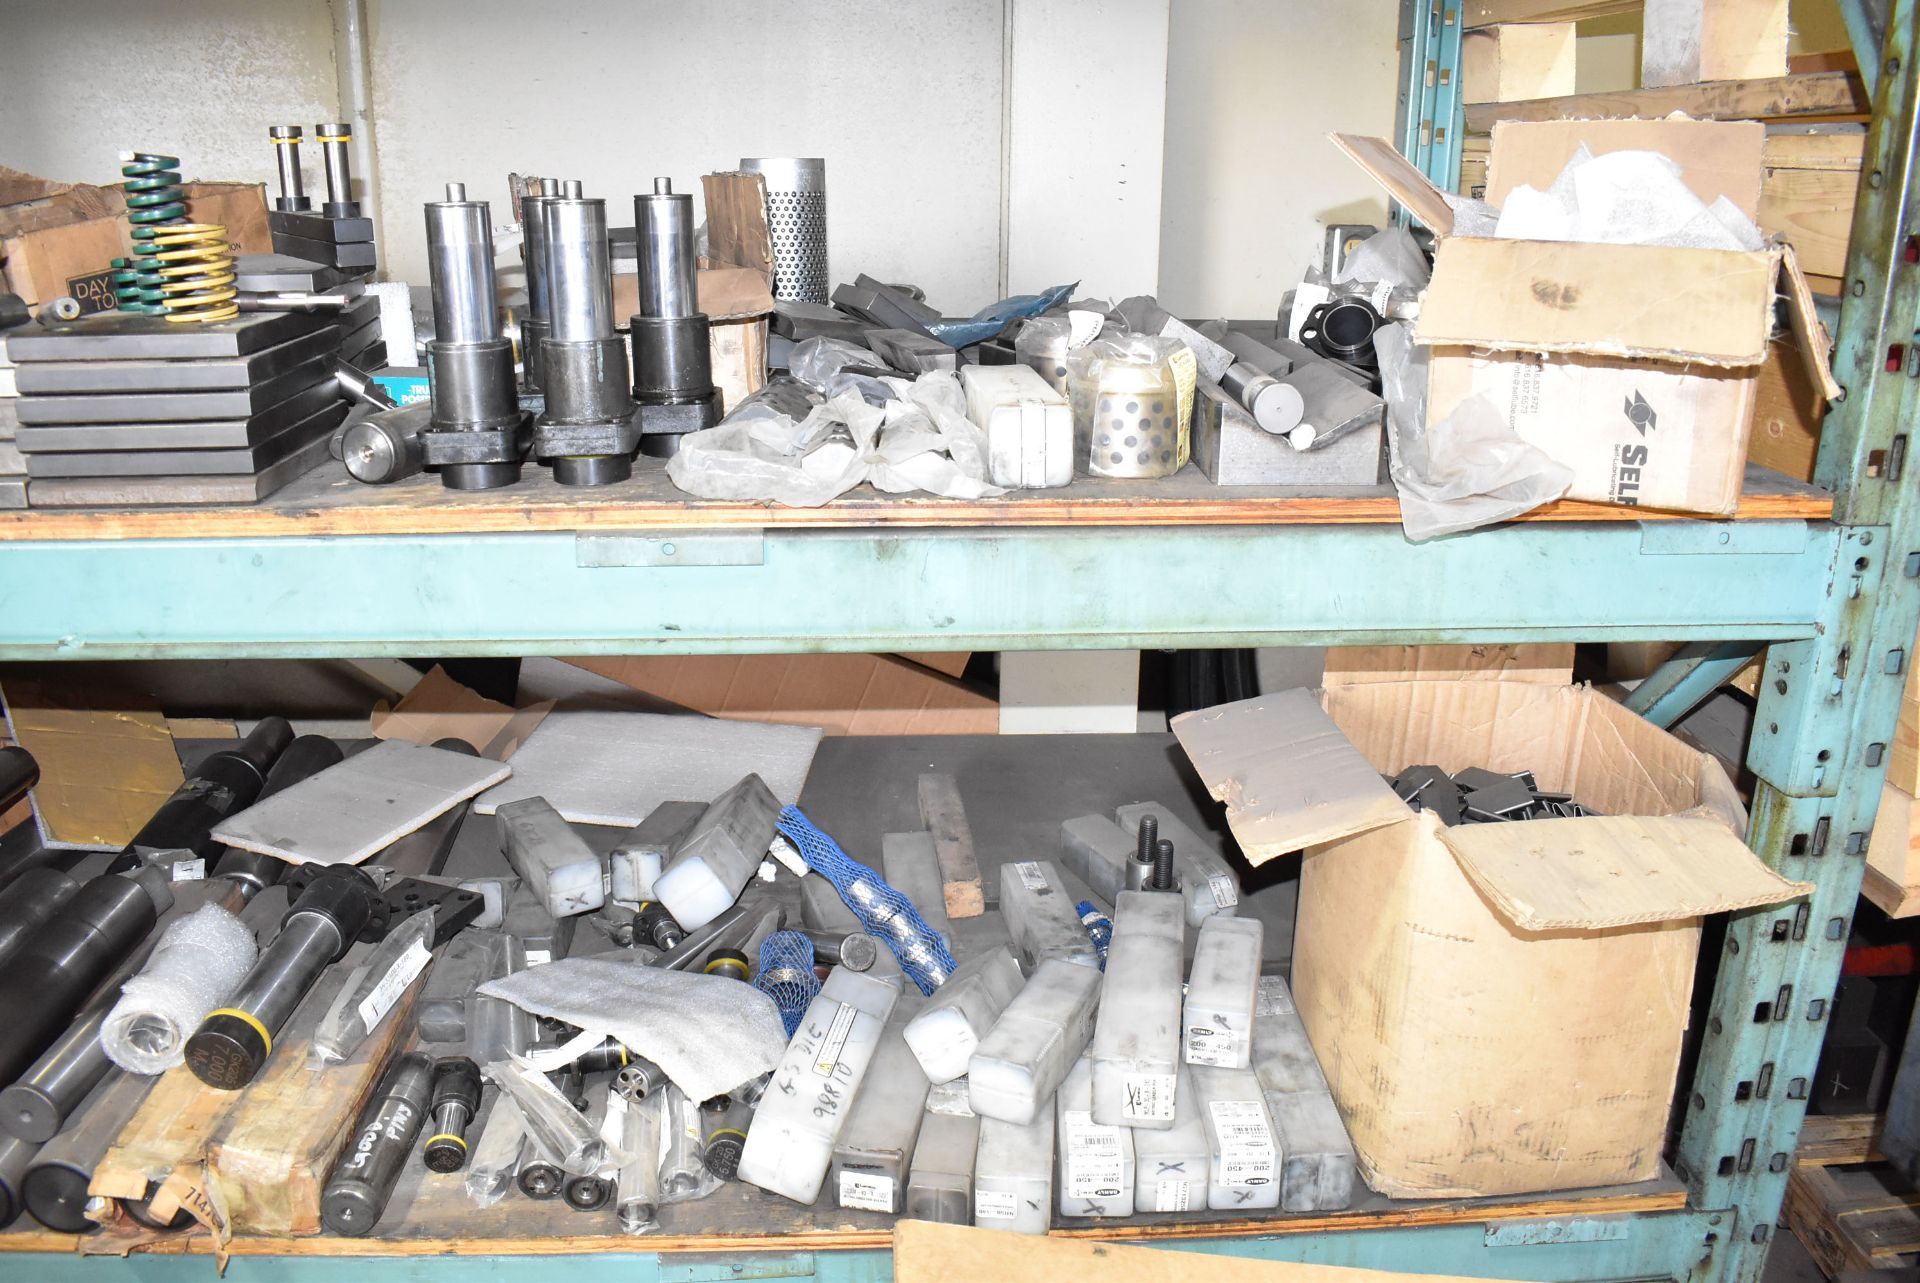 LOT/ CONTENTS OF RACK CONSISTING OF HYDRAULIC CYLINDERS & SUPPLIES - Image 3 of 4